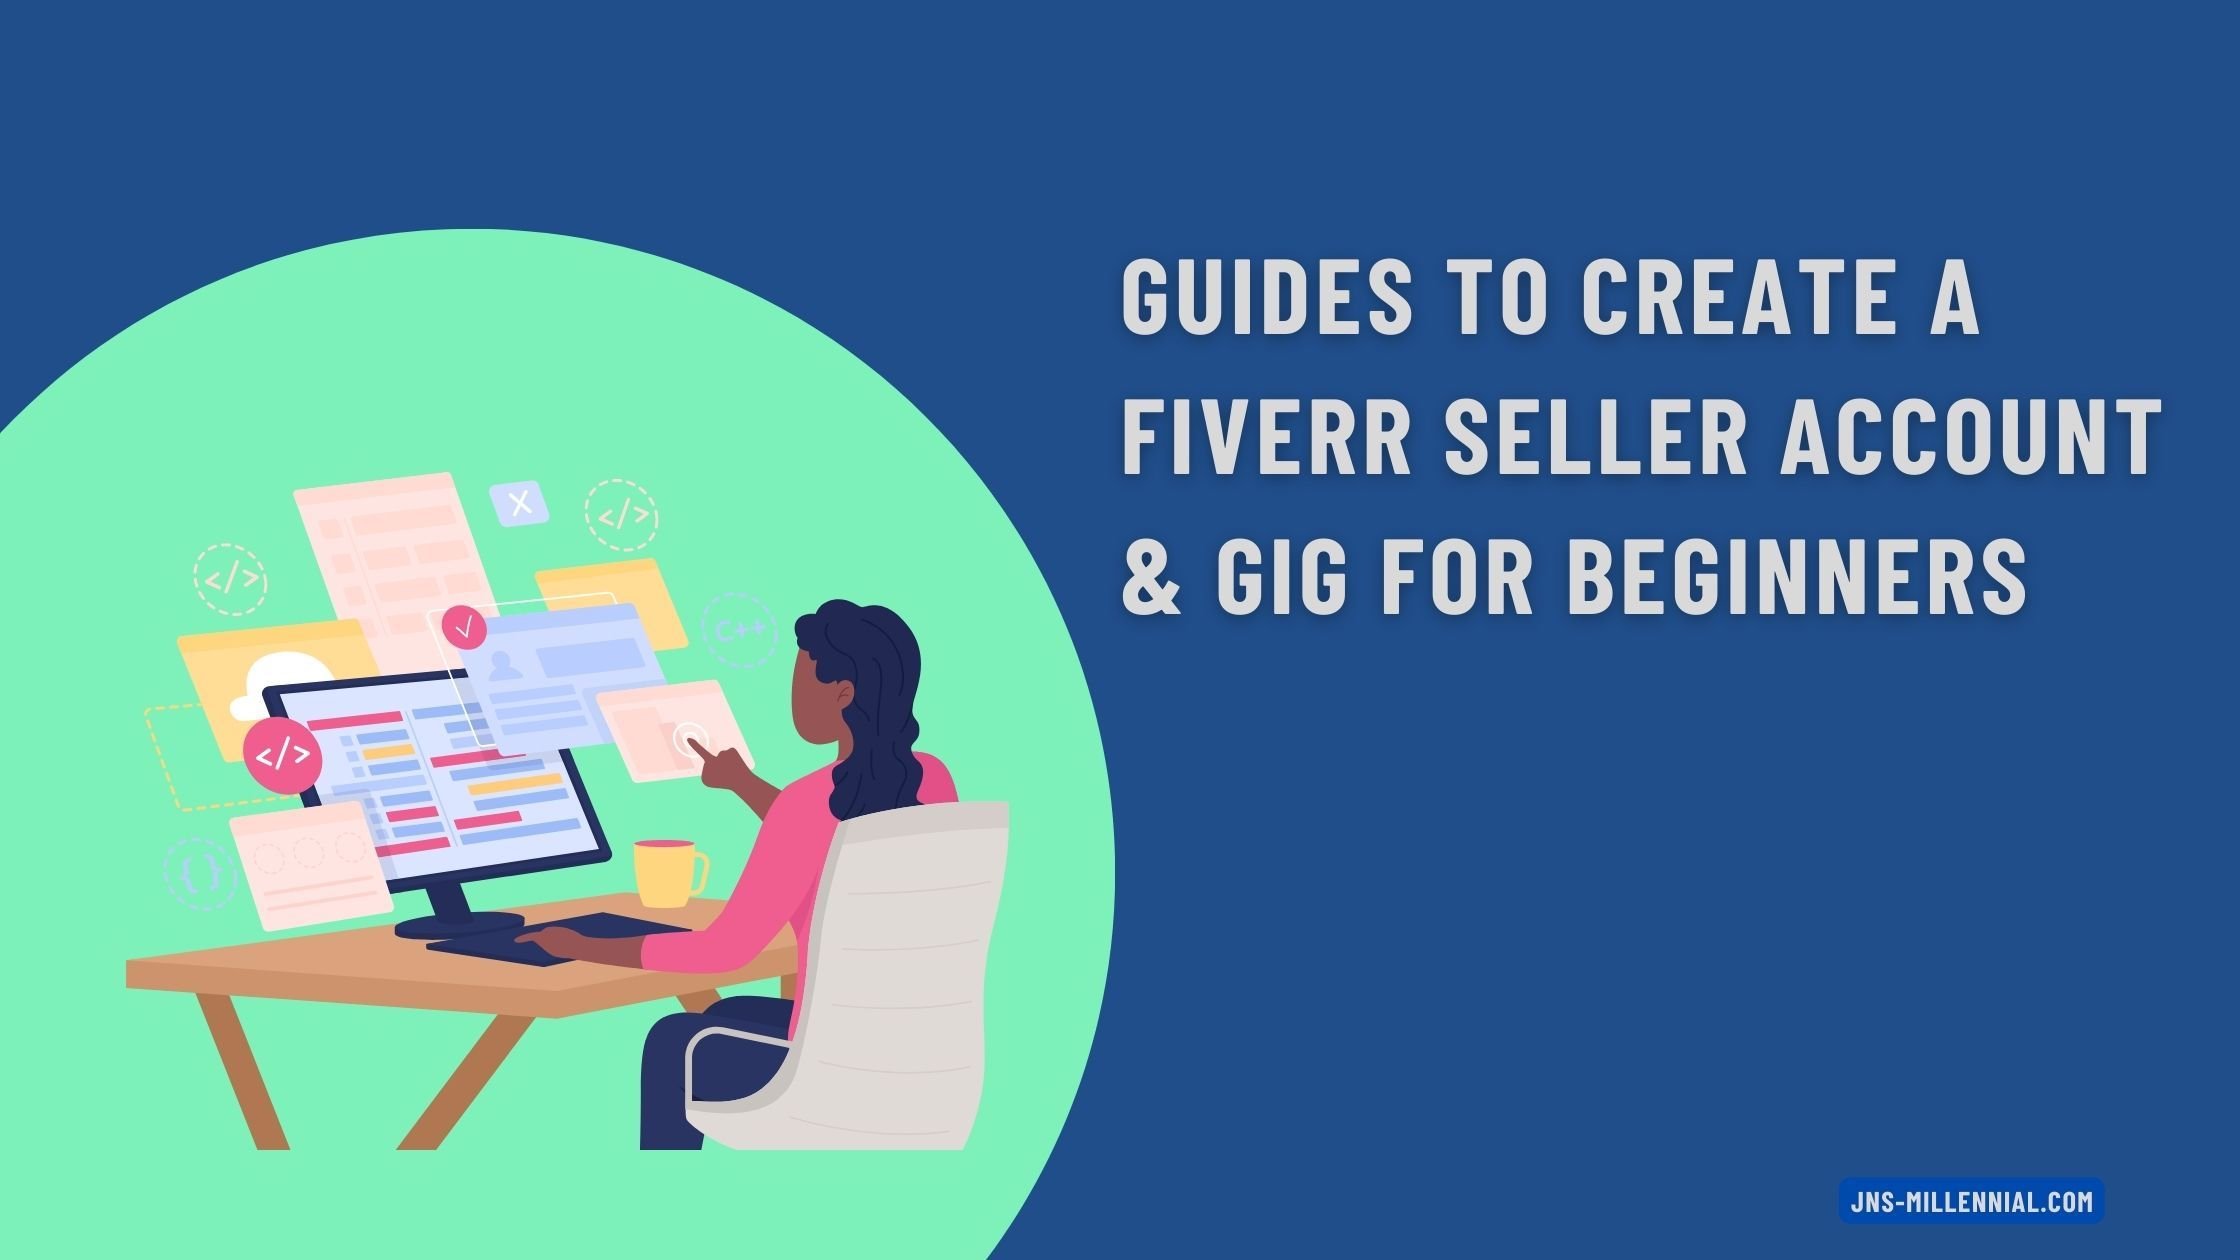 Guides to Create Fiverr seller account & gig for beginners